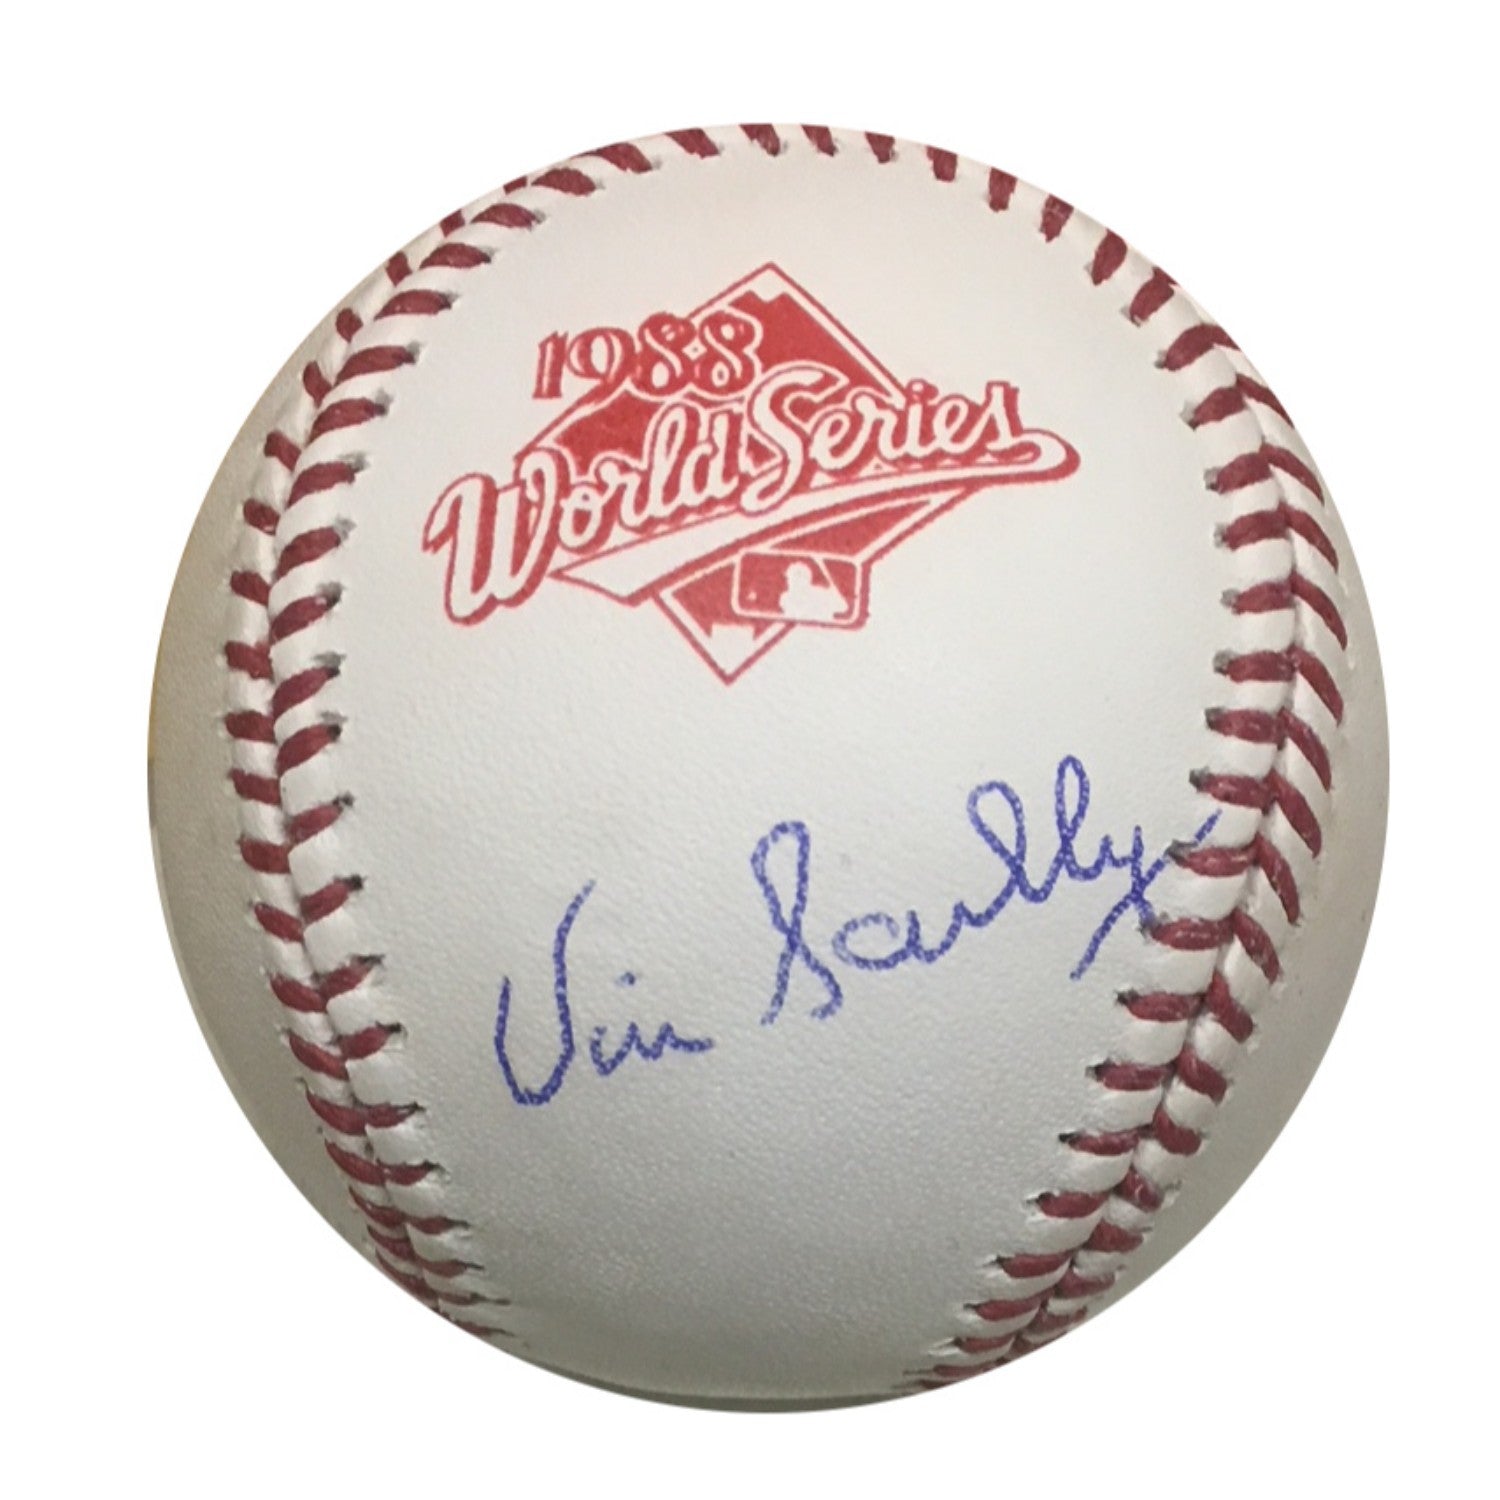 Autographed Baseball Value - What Determines It?1500 x 1500